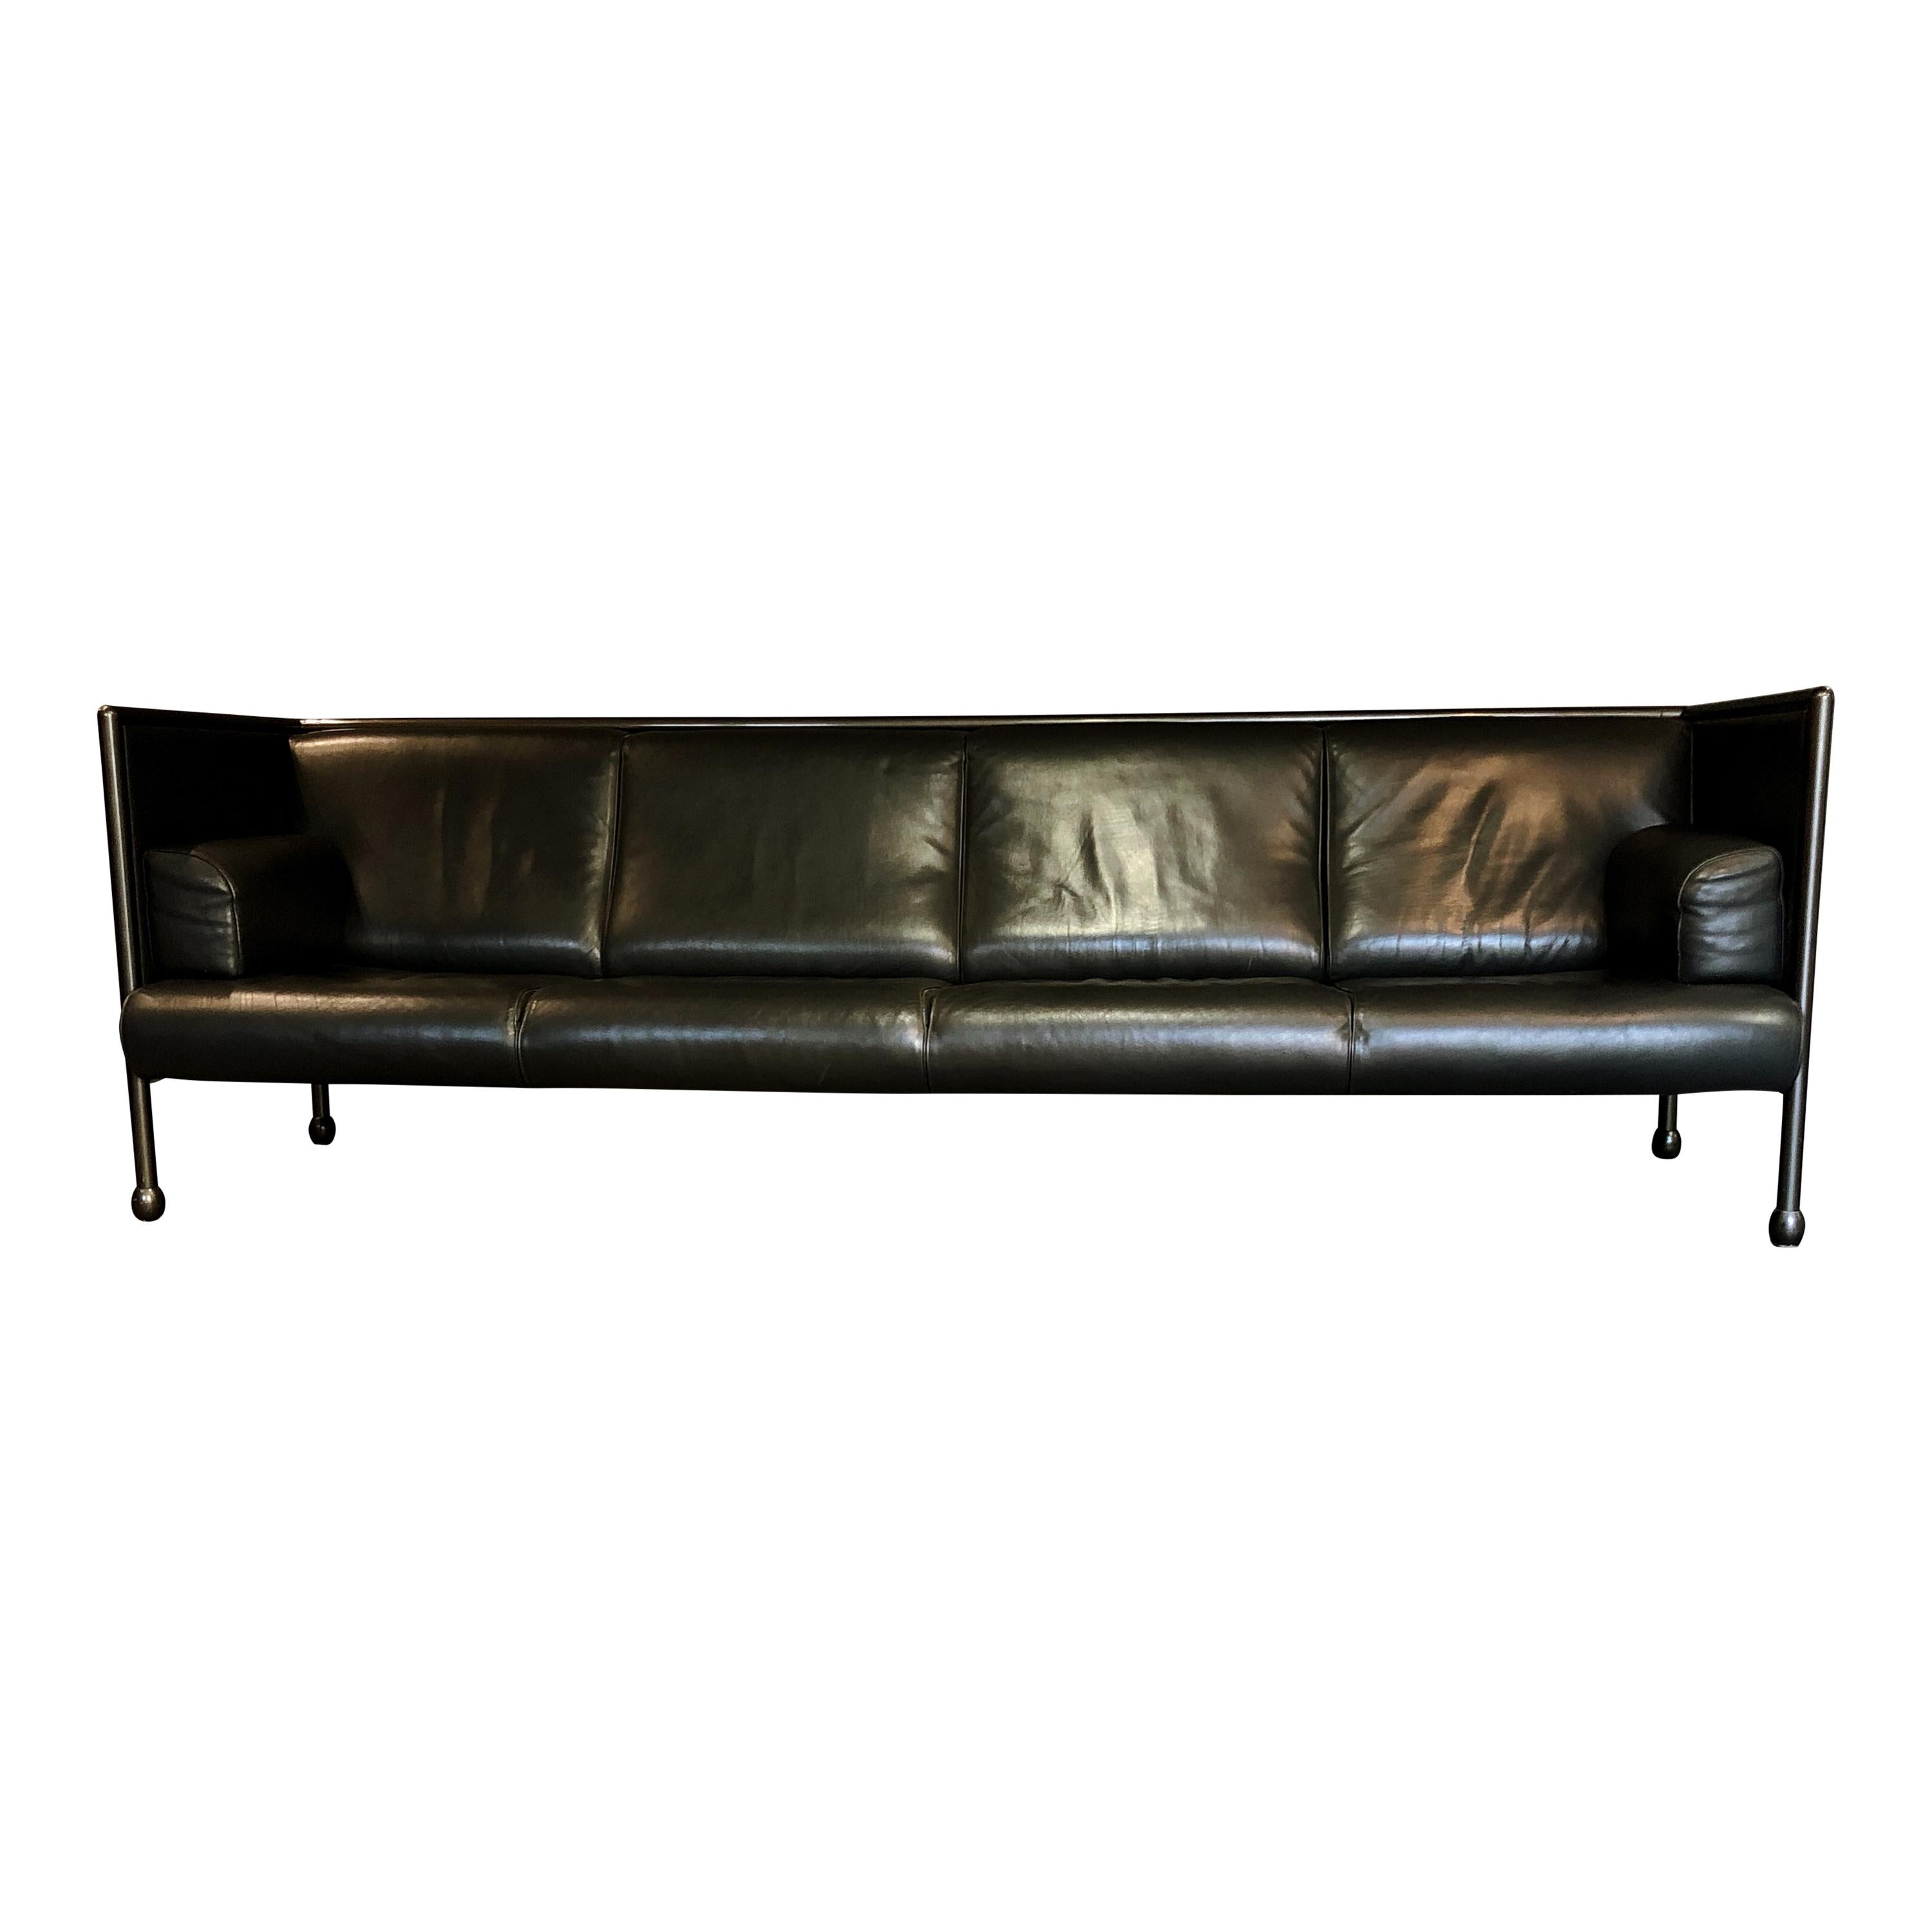 Ettore Sottsass Postmodern Iron and Black Leather Danube Sofa for Cassina, 1992 For Sale 1